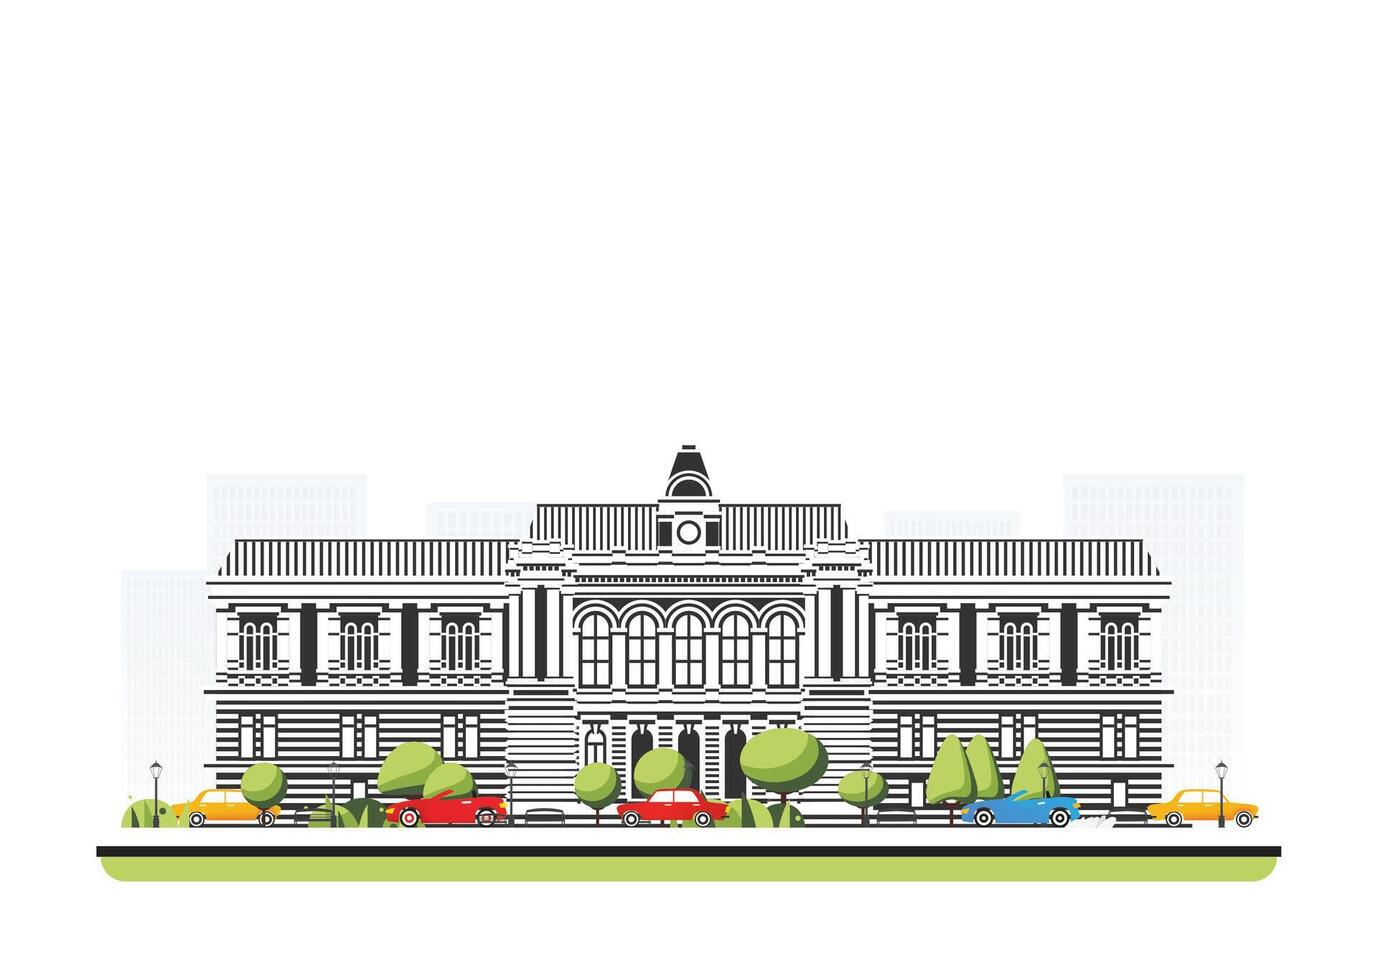 City hall building in flat style with trees and cars. City scene isolated on white background. Urban architecture. vector